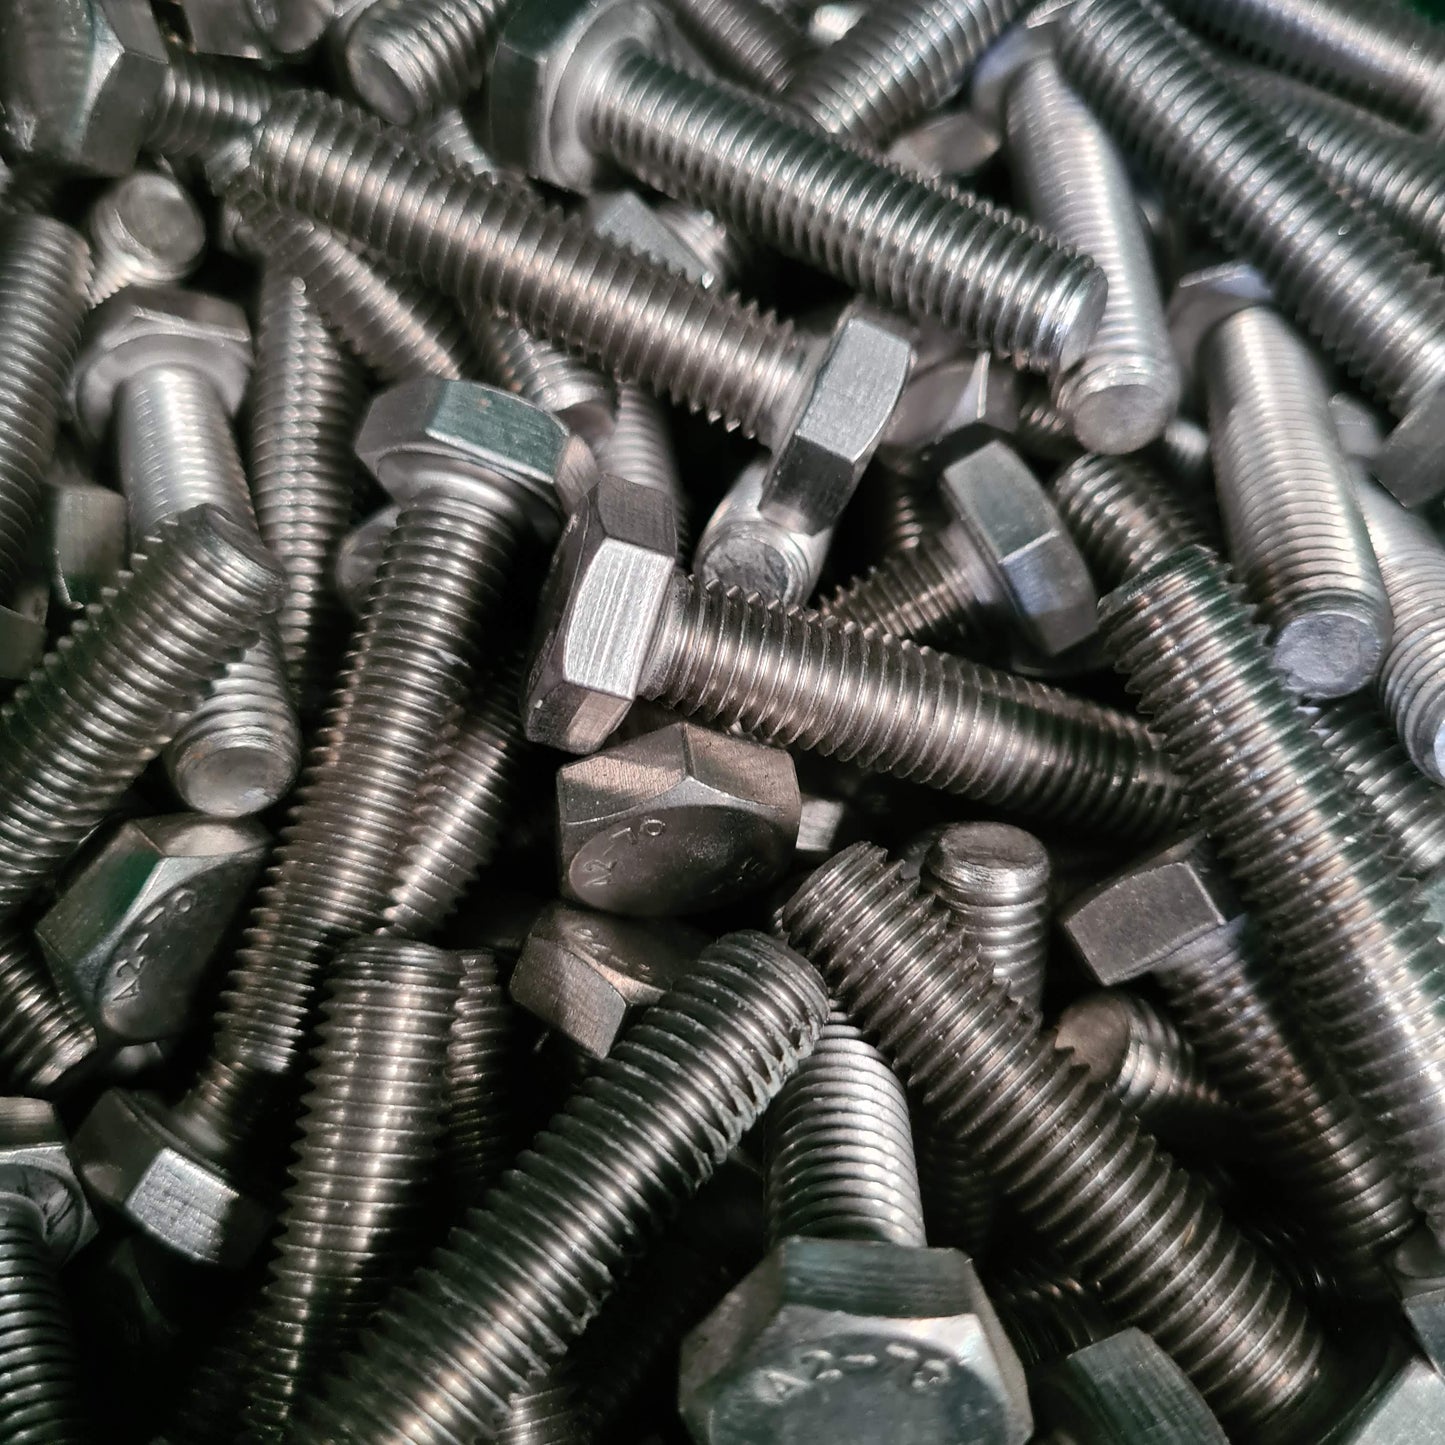 M8 Set Screw available in 316 or 304 stainless steel and lengths from 12mm to 100mm